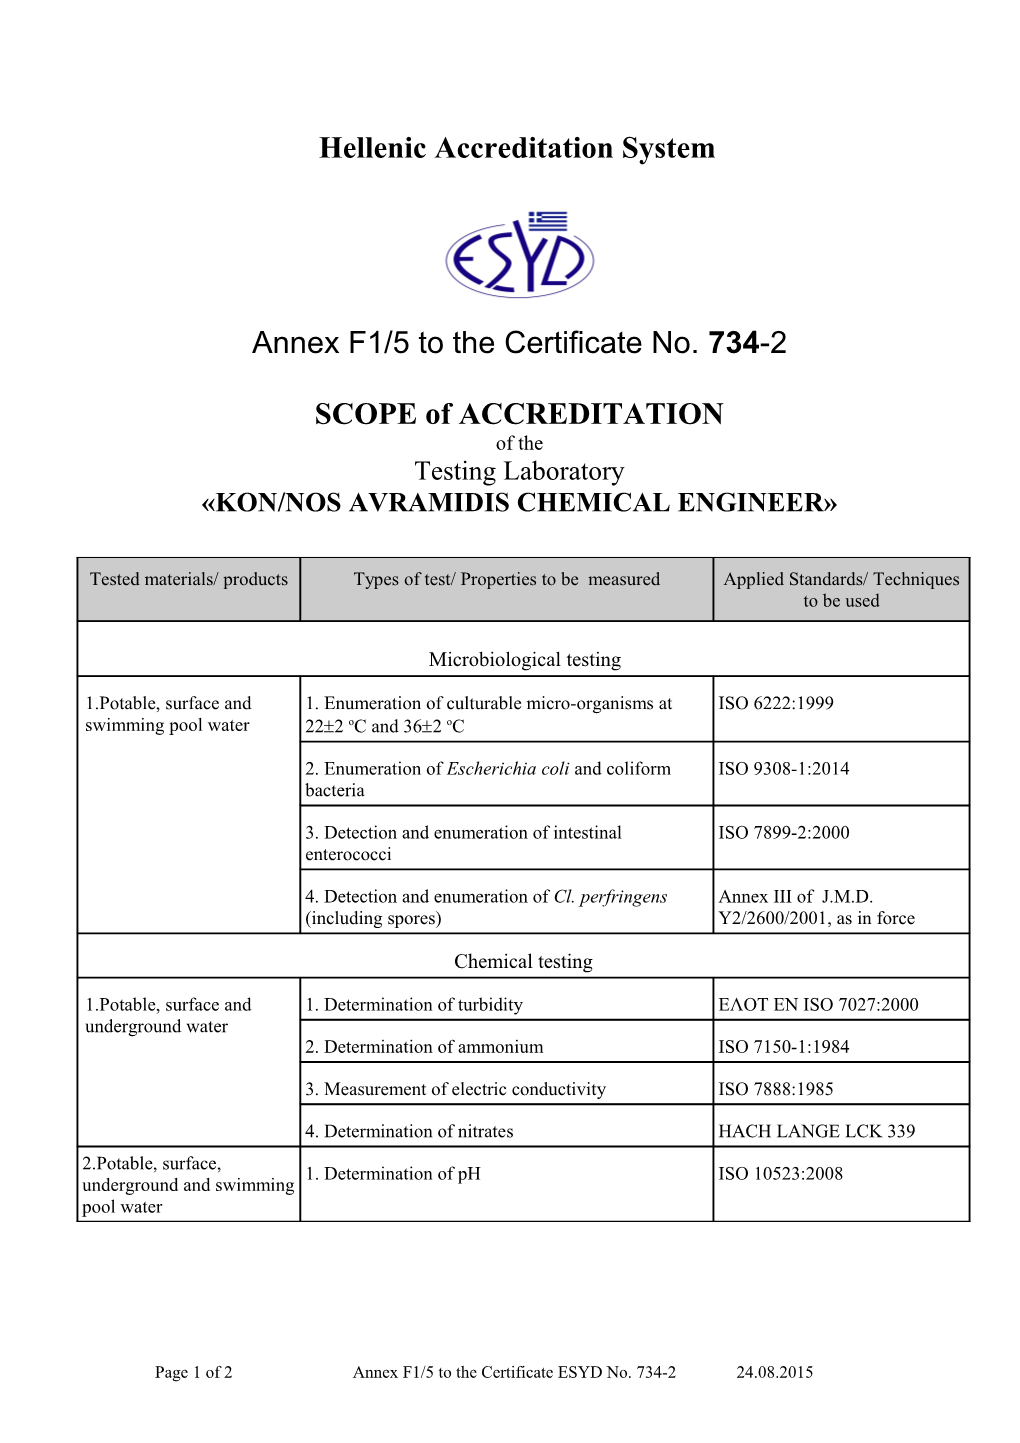 Hellenic Accreditation System s11